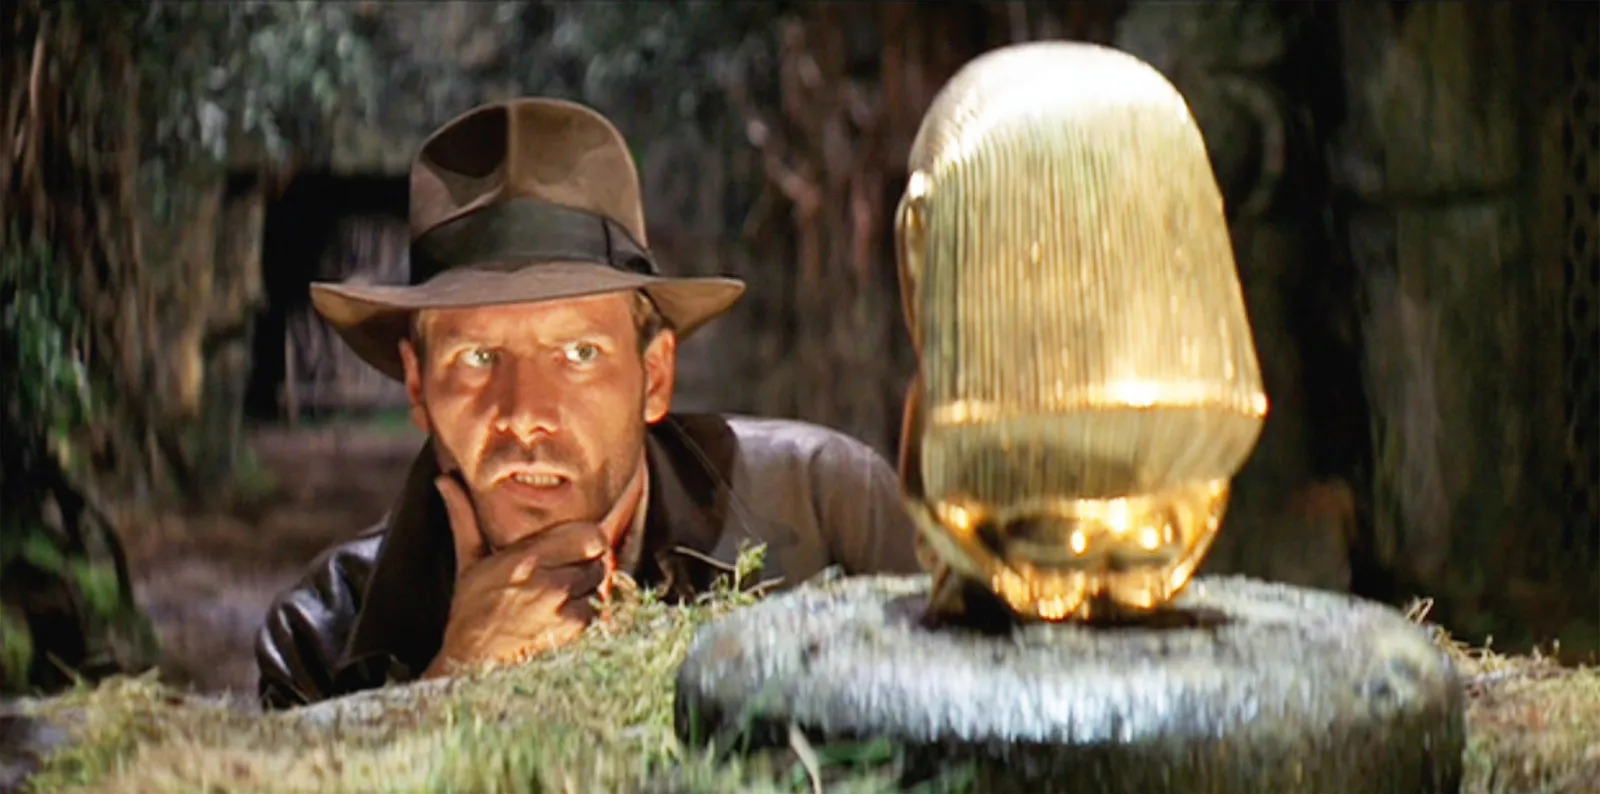 The Enduring Myths of 'Raiders of the Lost Ark' | Arts & Culture|  Smithsonian Magazine